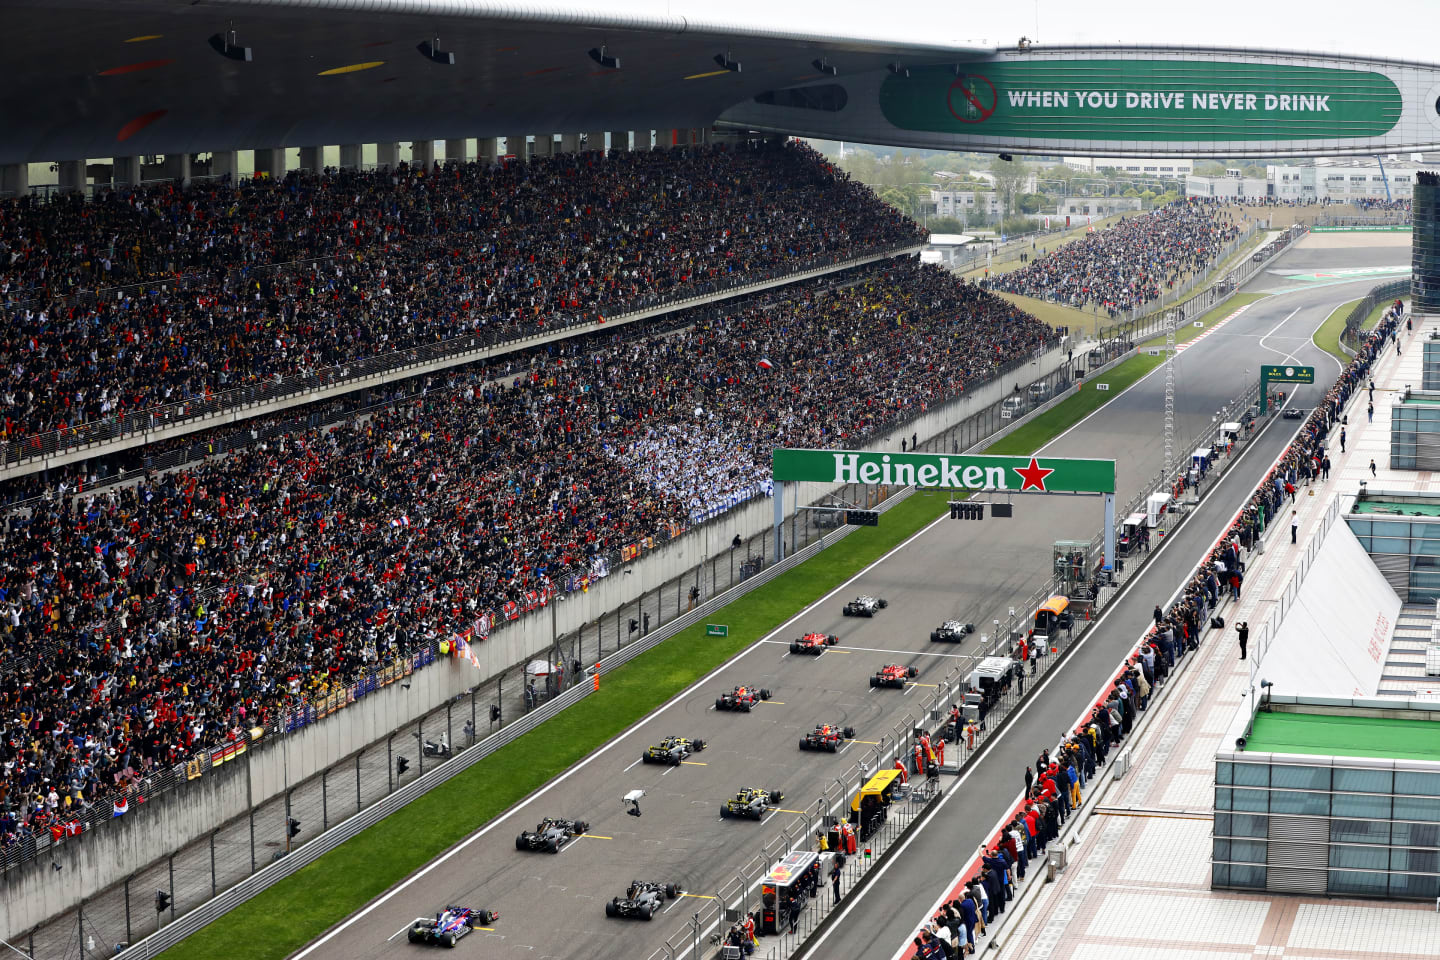 SHANGHAI, CHINA - APRIL 14: A general view at the start of the race during the F1 Grand Prix of